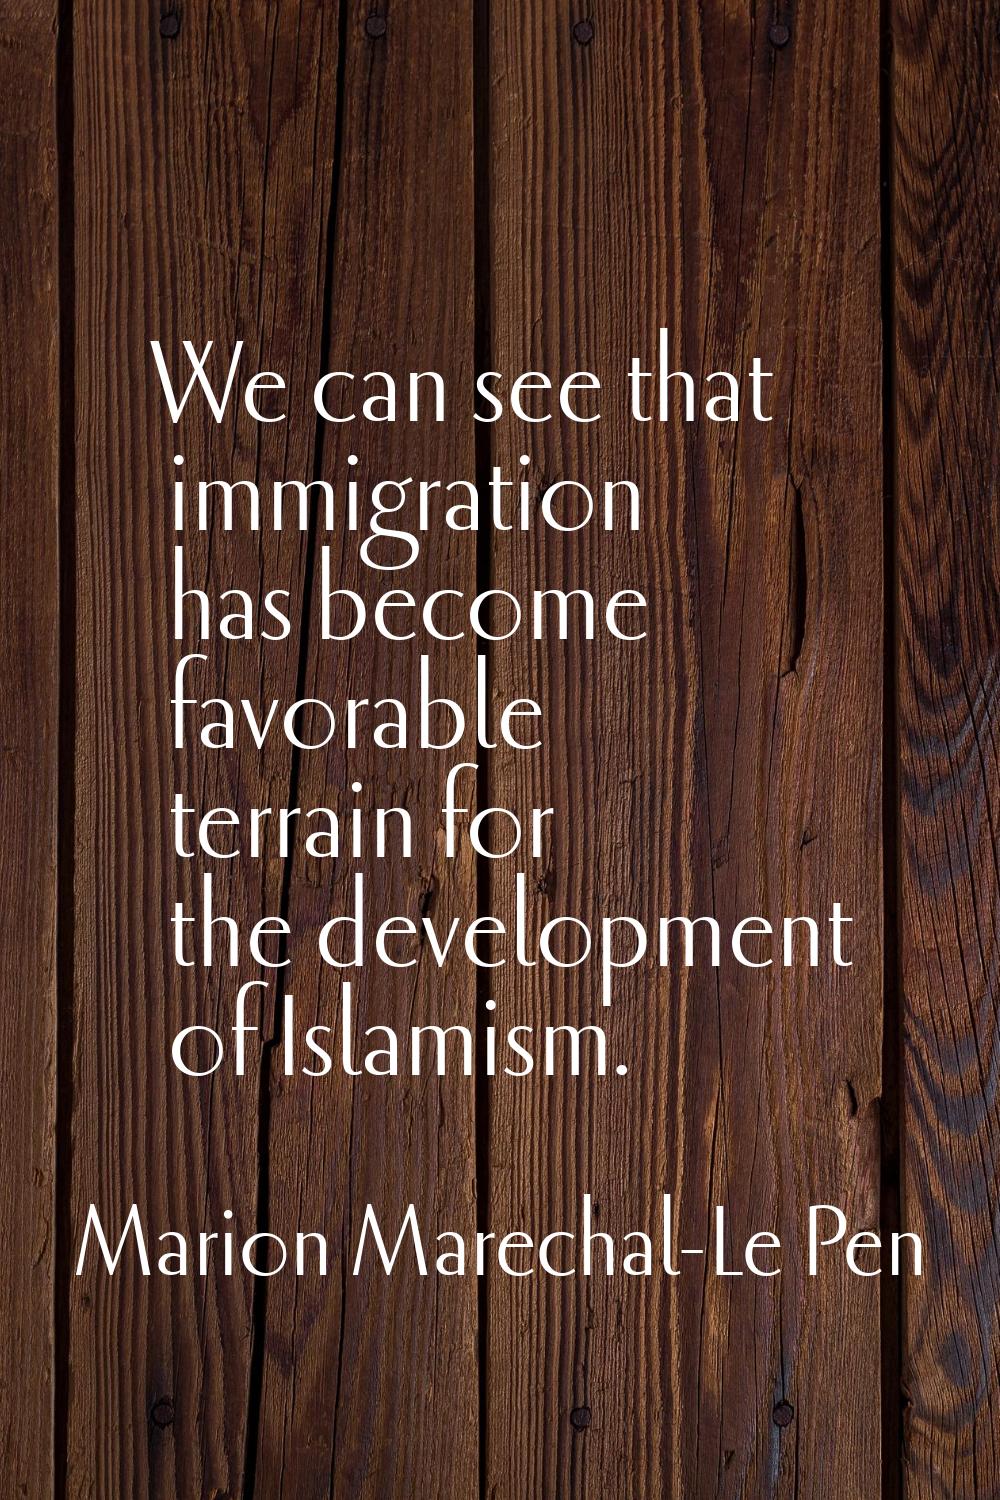 We can see that immigration has become favorable terrain for the development of Islamism.